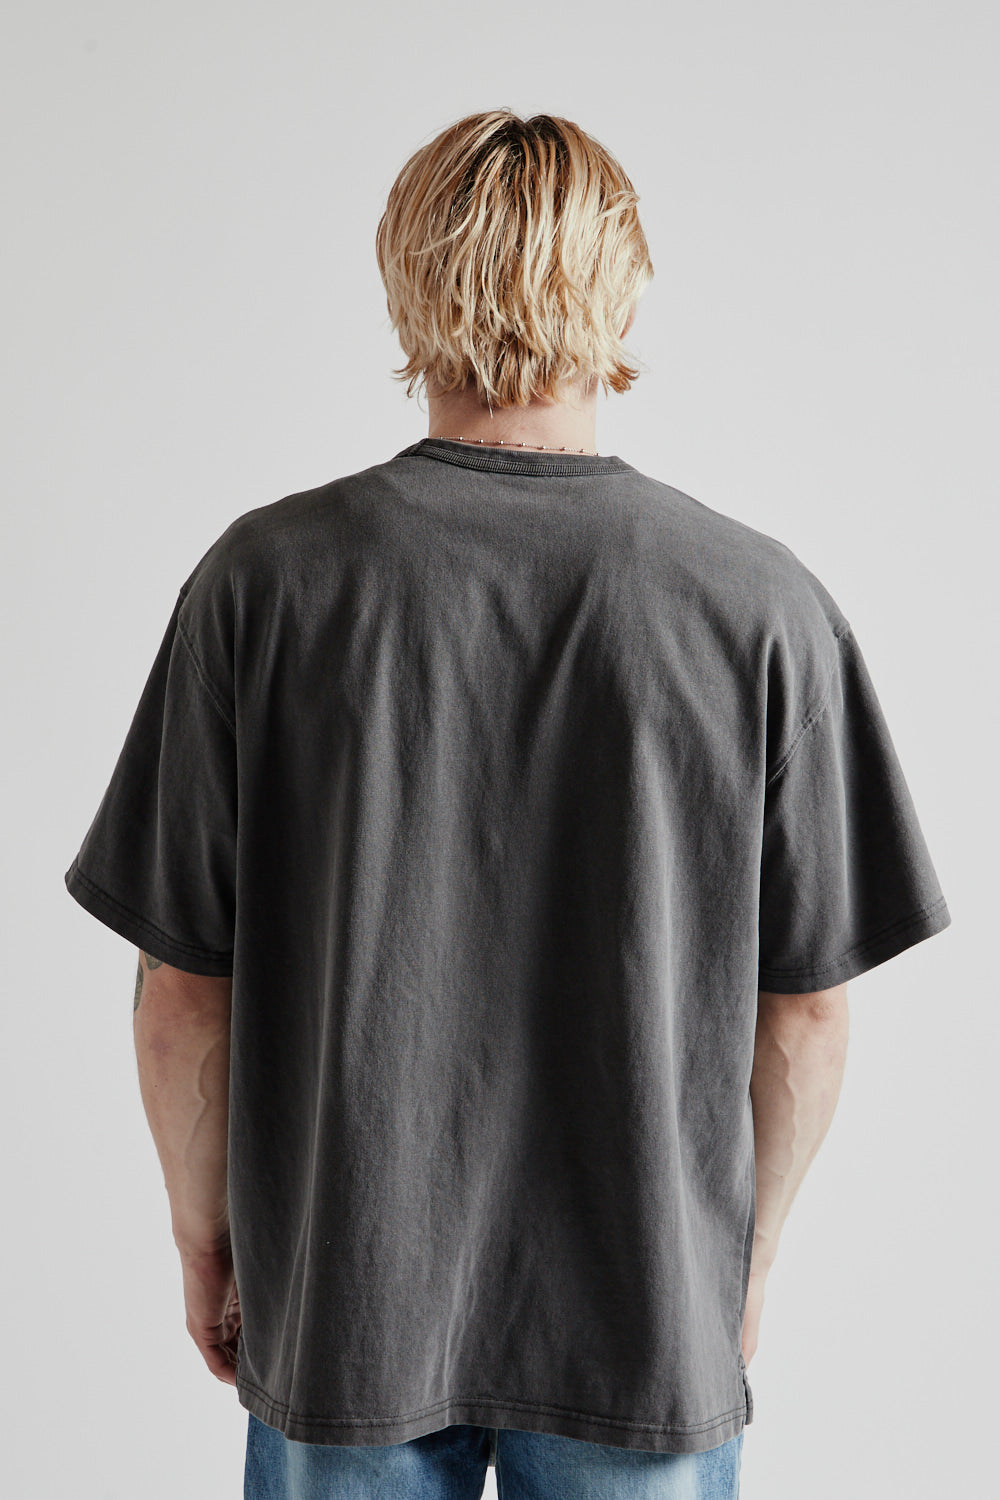 Frizmworks OG Pigment Dyeing Half Tee in Charcoal